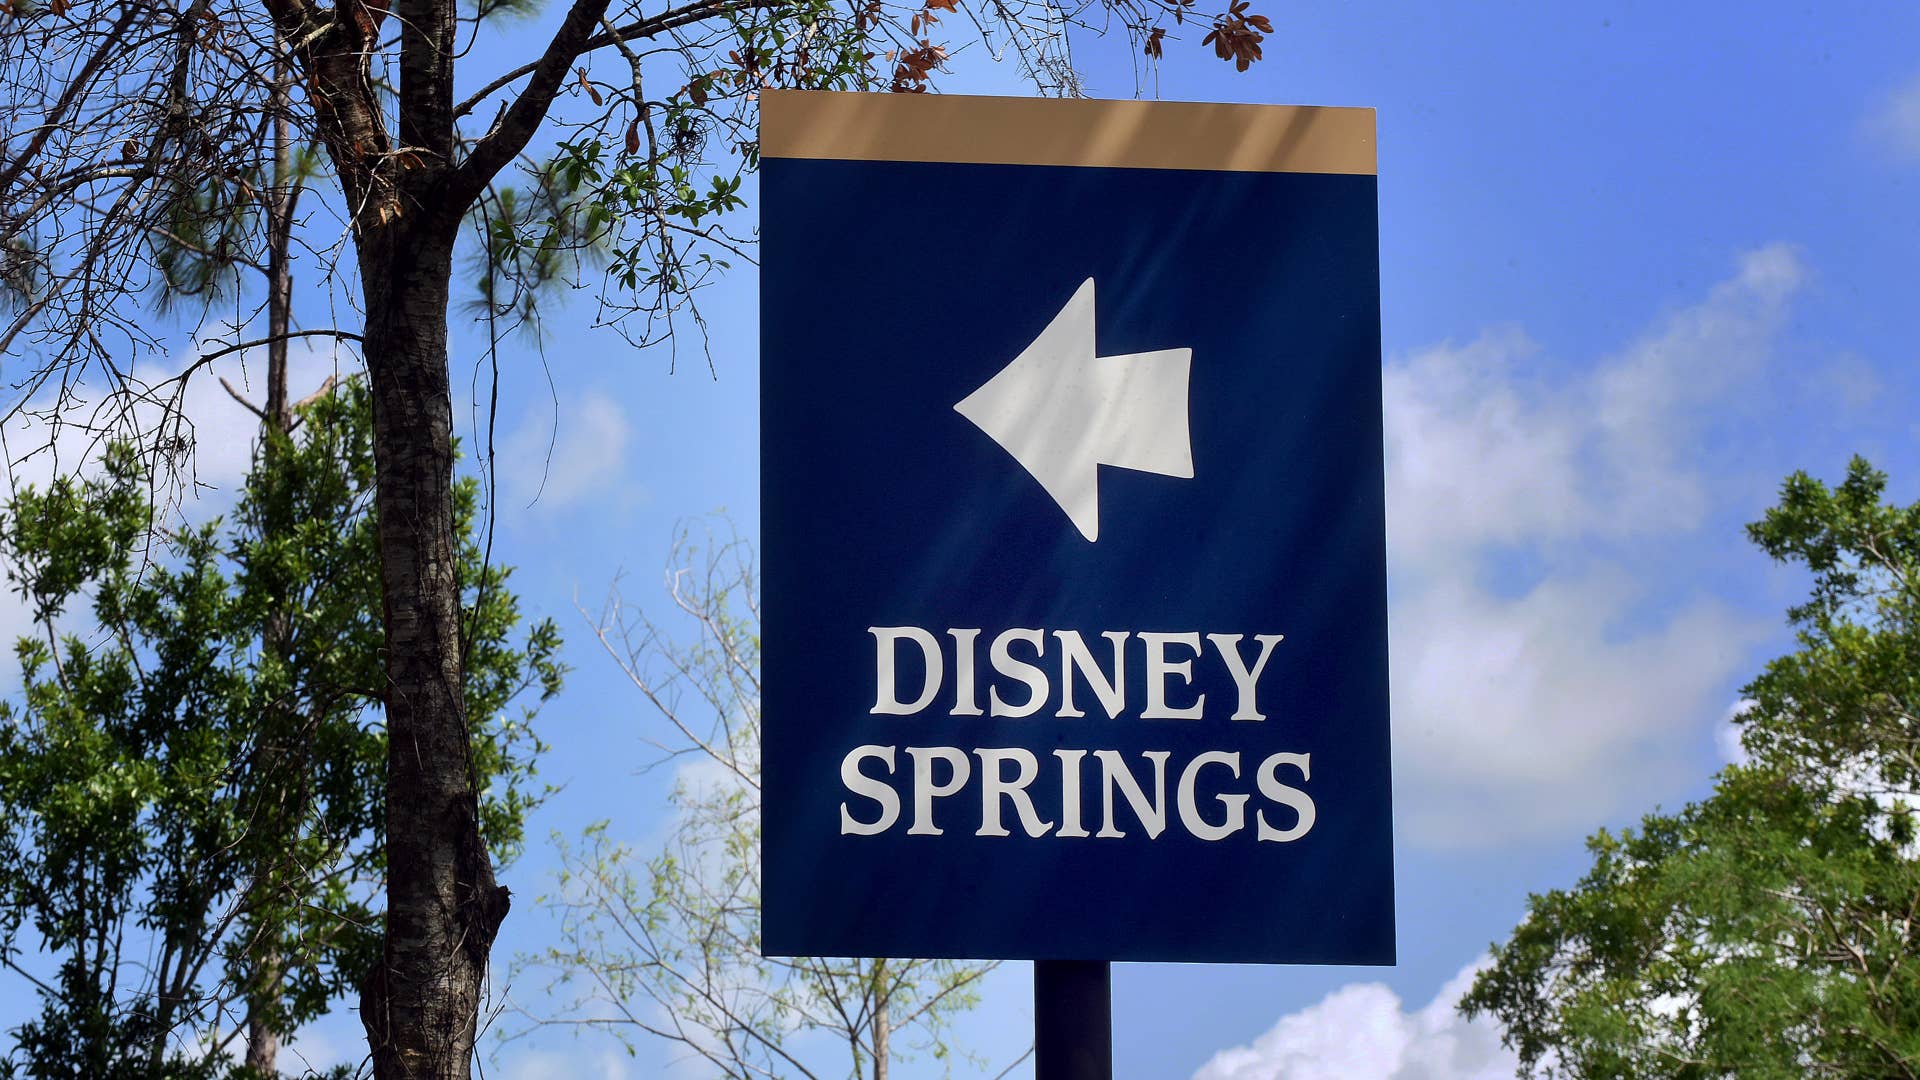 A sign directing visitors to Disney Springs at Walt Disney World.